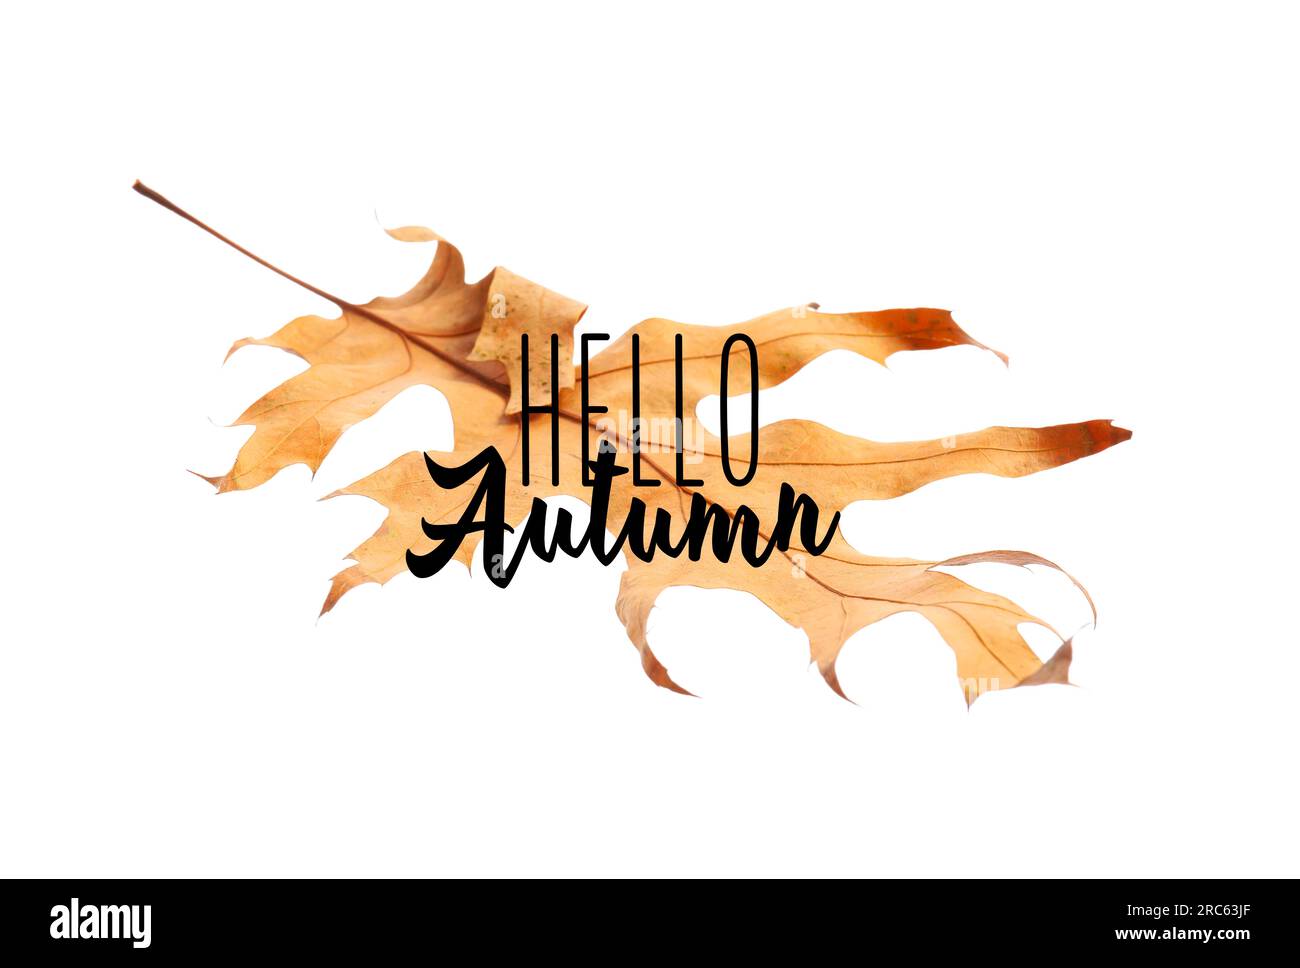 Banner with text HELLO AUTUMN and fallen leaf Stock Photo